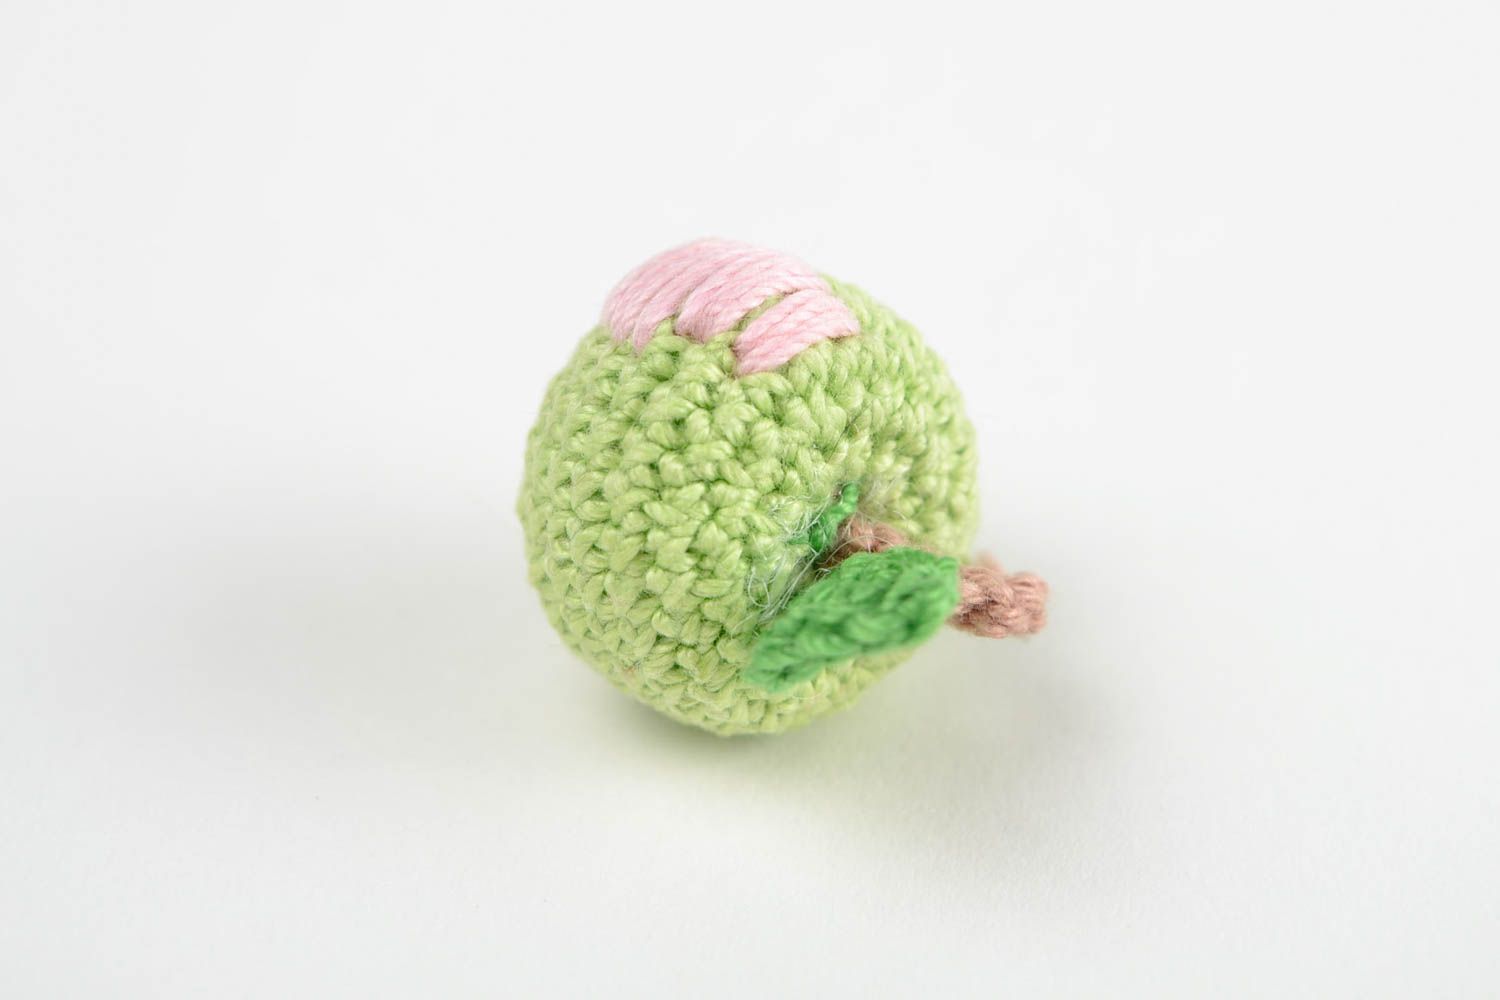 Handmade toy designer toy for baby crocheted toy unusual soft toy for kids photo 5